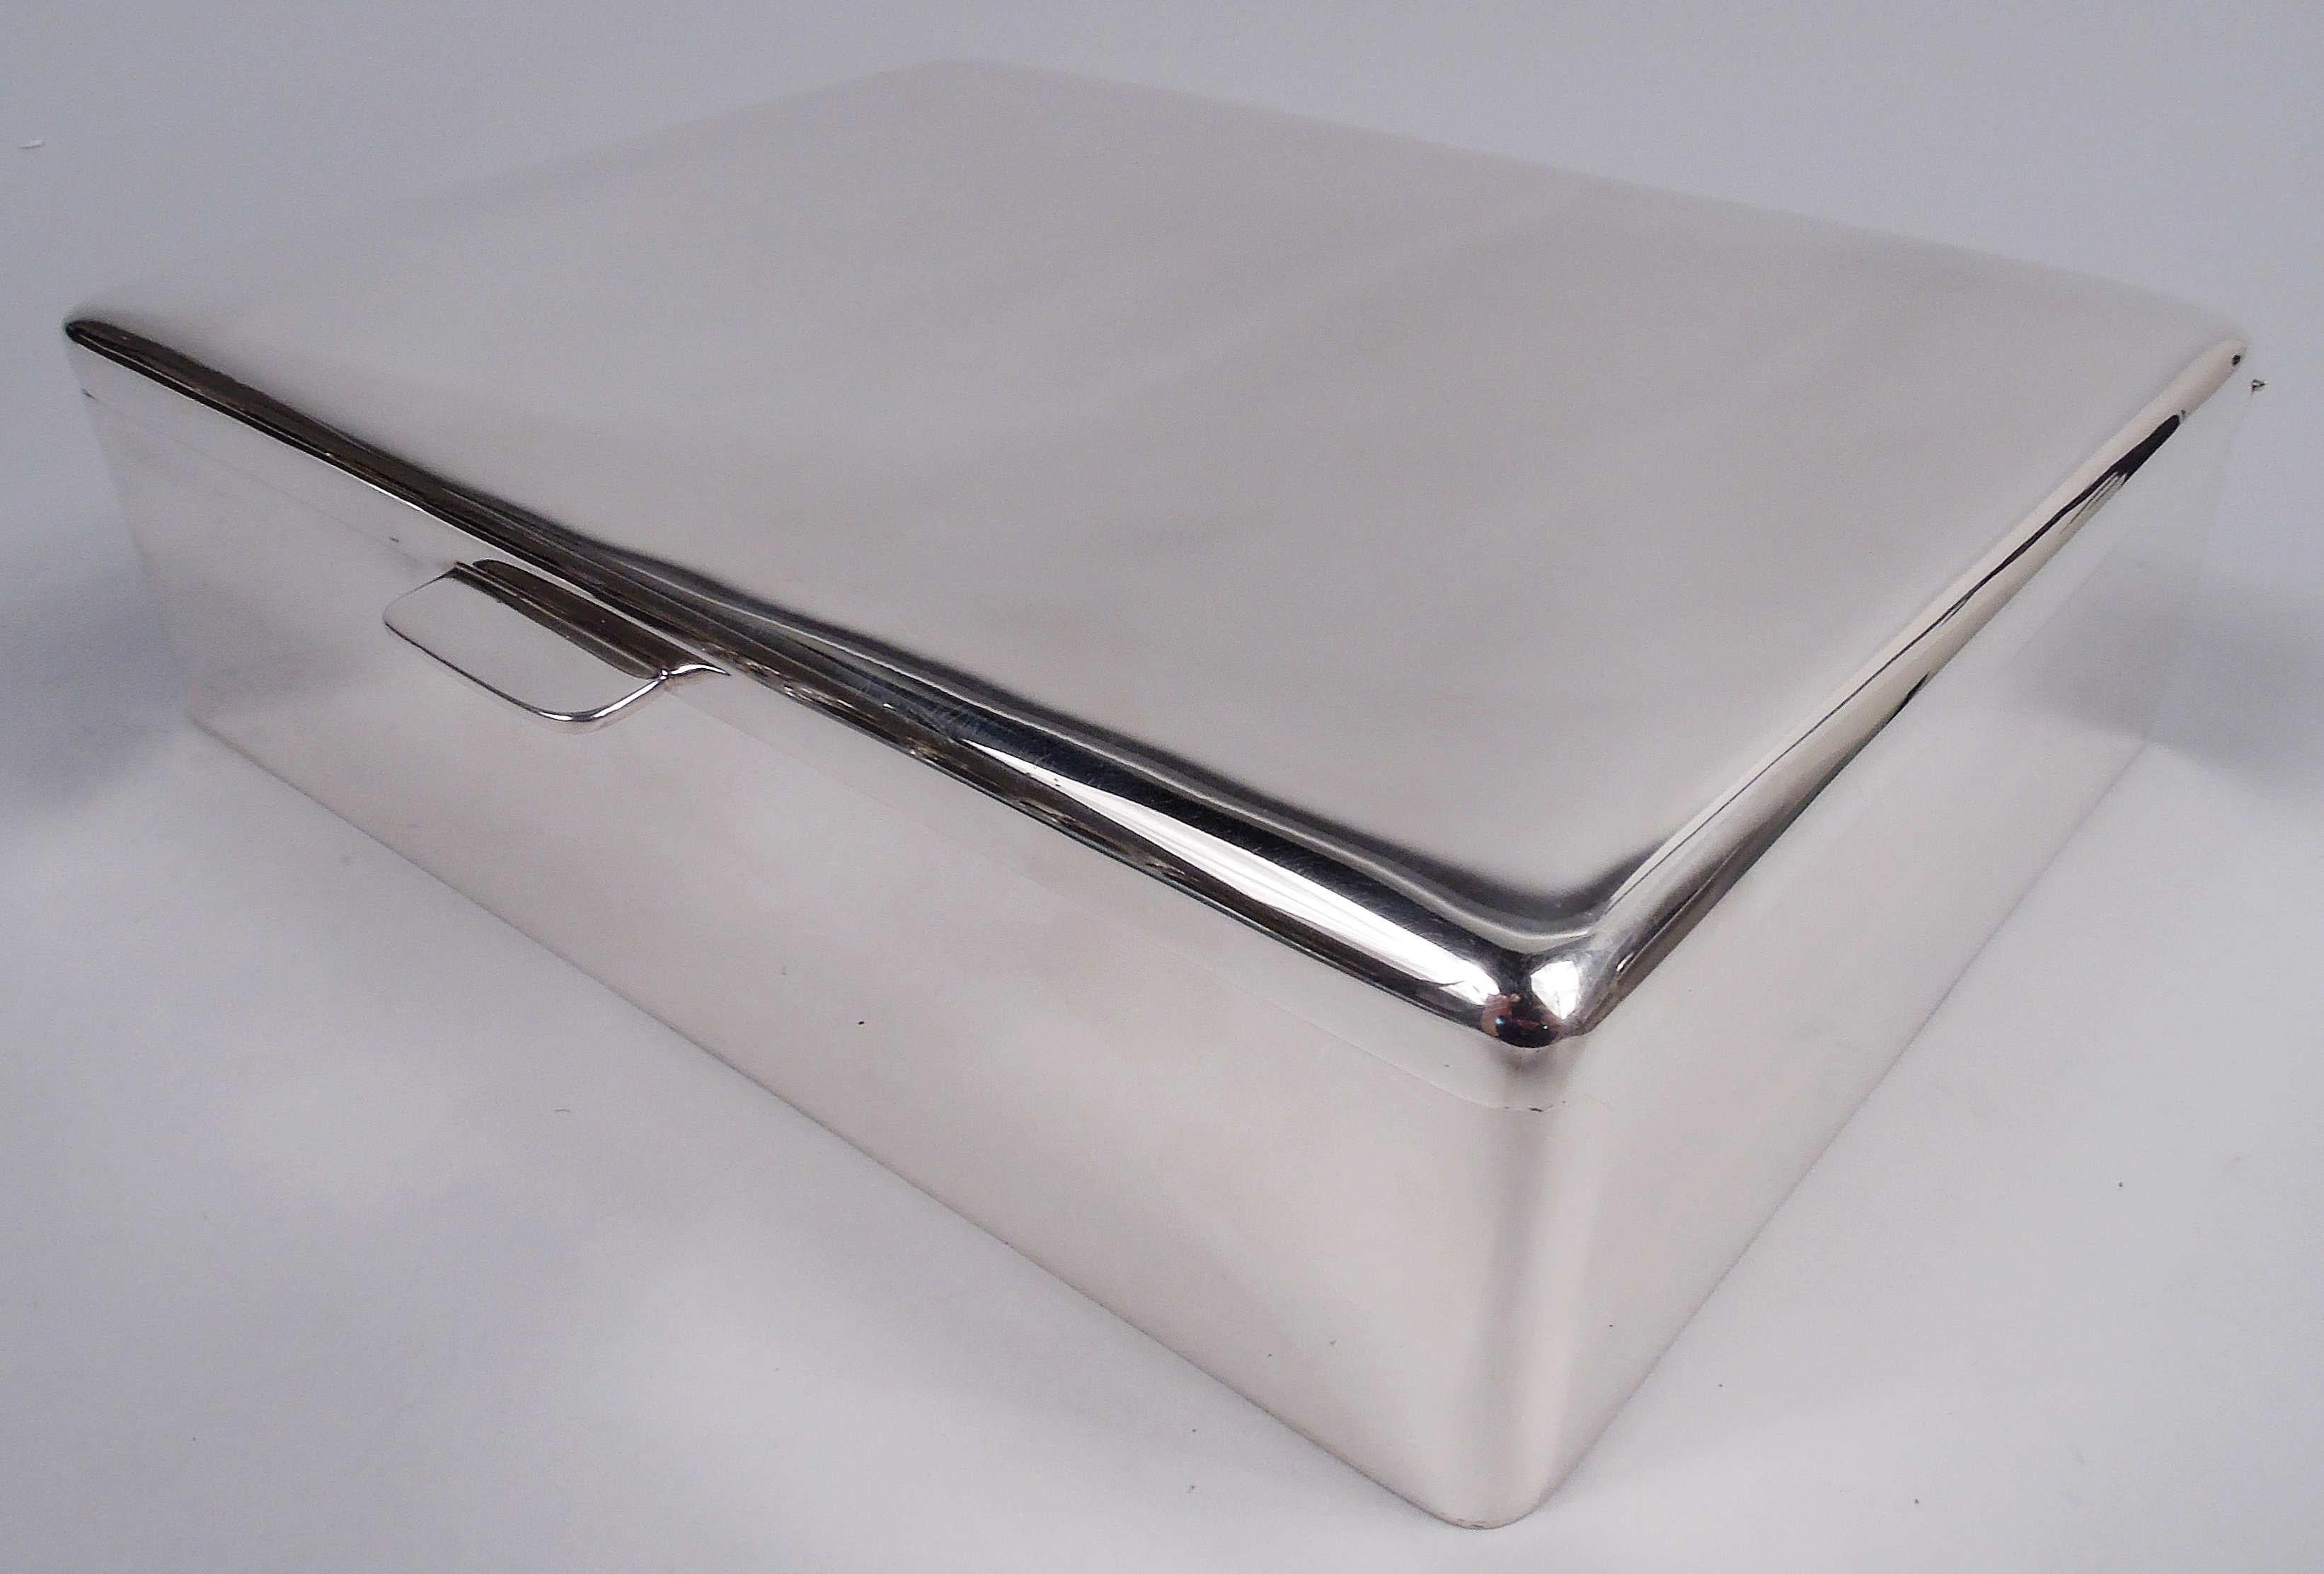 Midcentury Modern sterling silver box. Made by JC Boardman & Co. in Connecticut. Rectangular with straight sides and curved corners. Cover hinged with gently curved top and rectangular tab. Fully marked including maker’s stamp and no. 845. Heavy